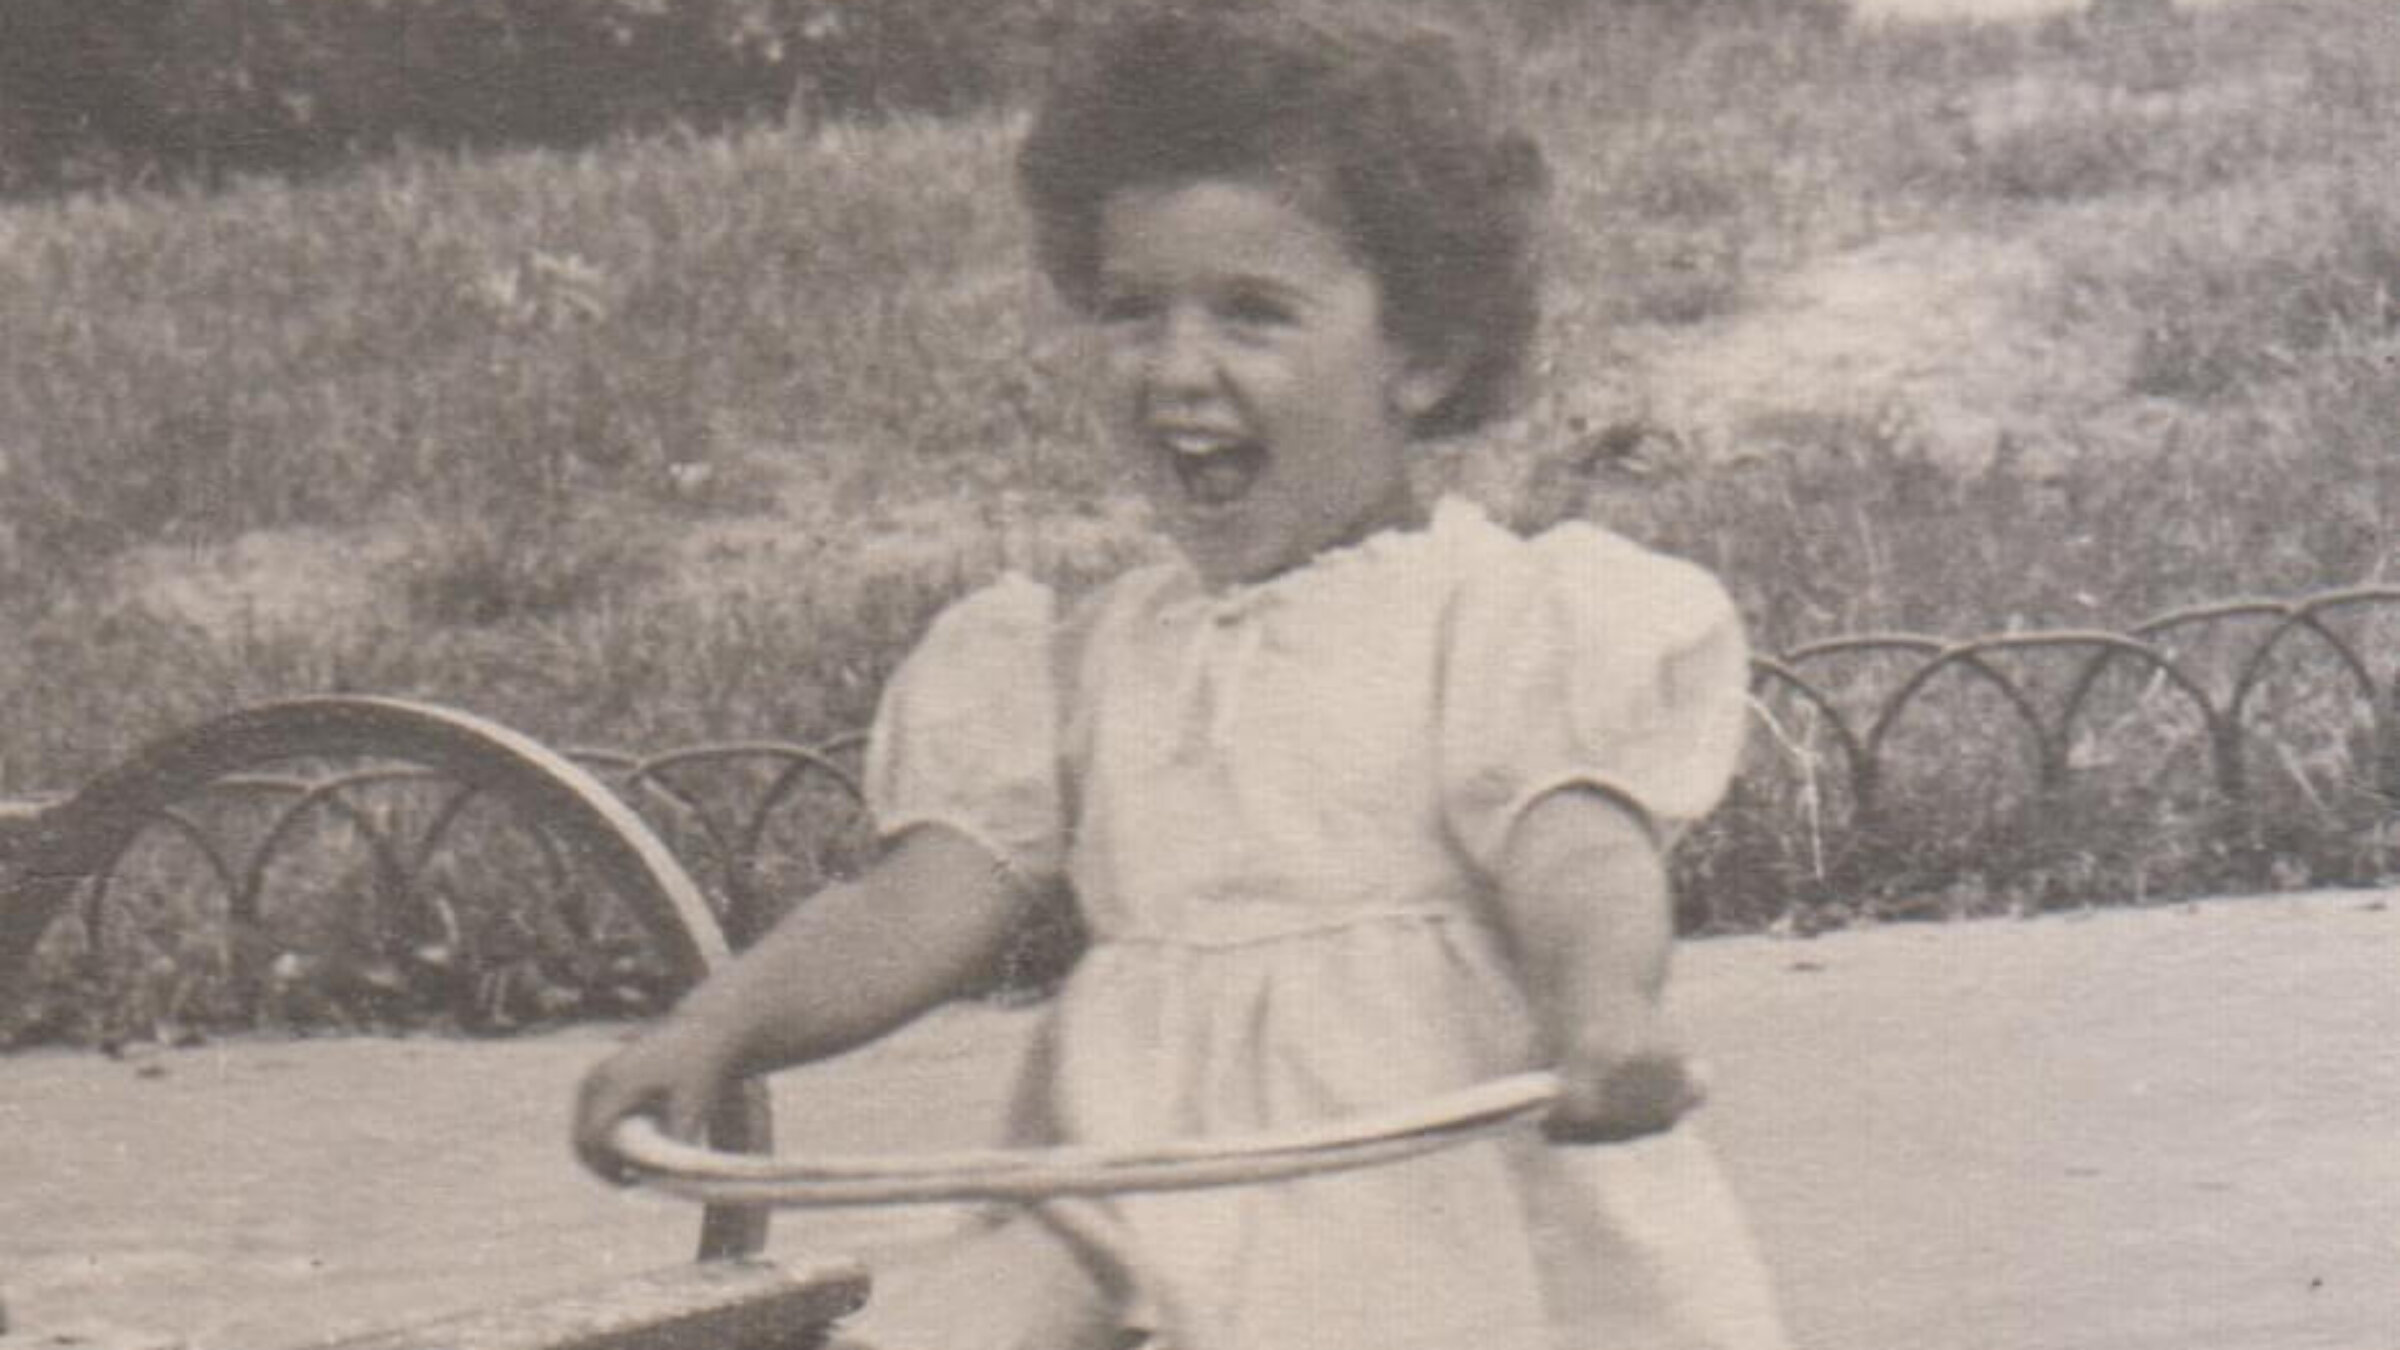 A young Ruth looks ahead to a life filled with triumph, activism, and a pair of bat mitzvahs.